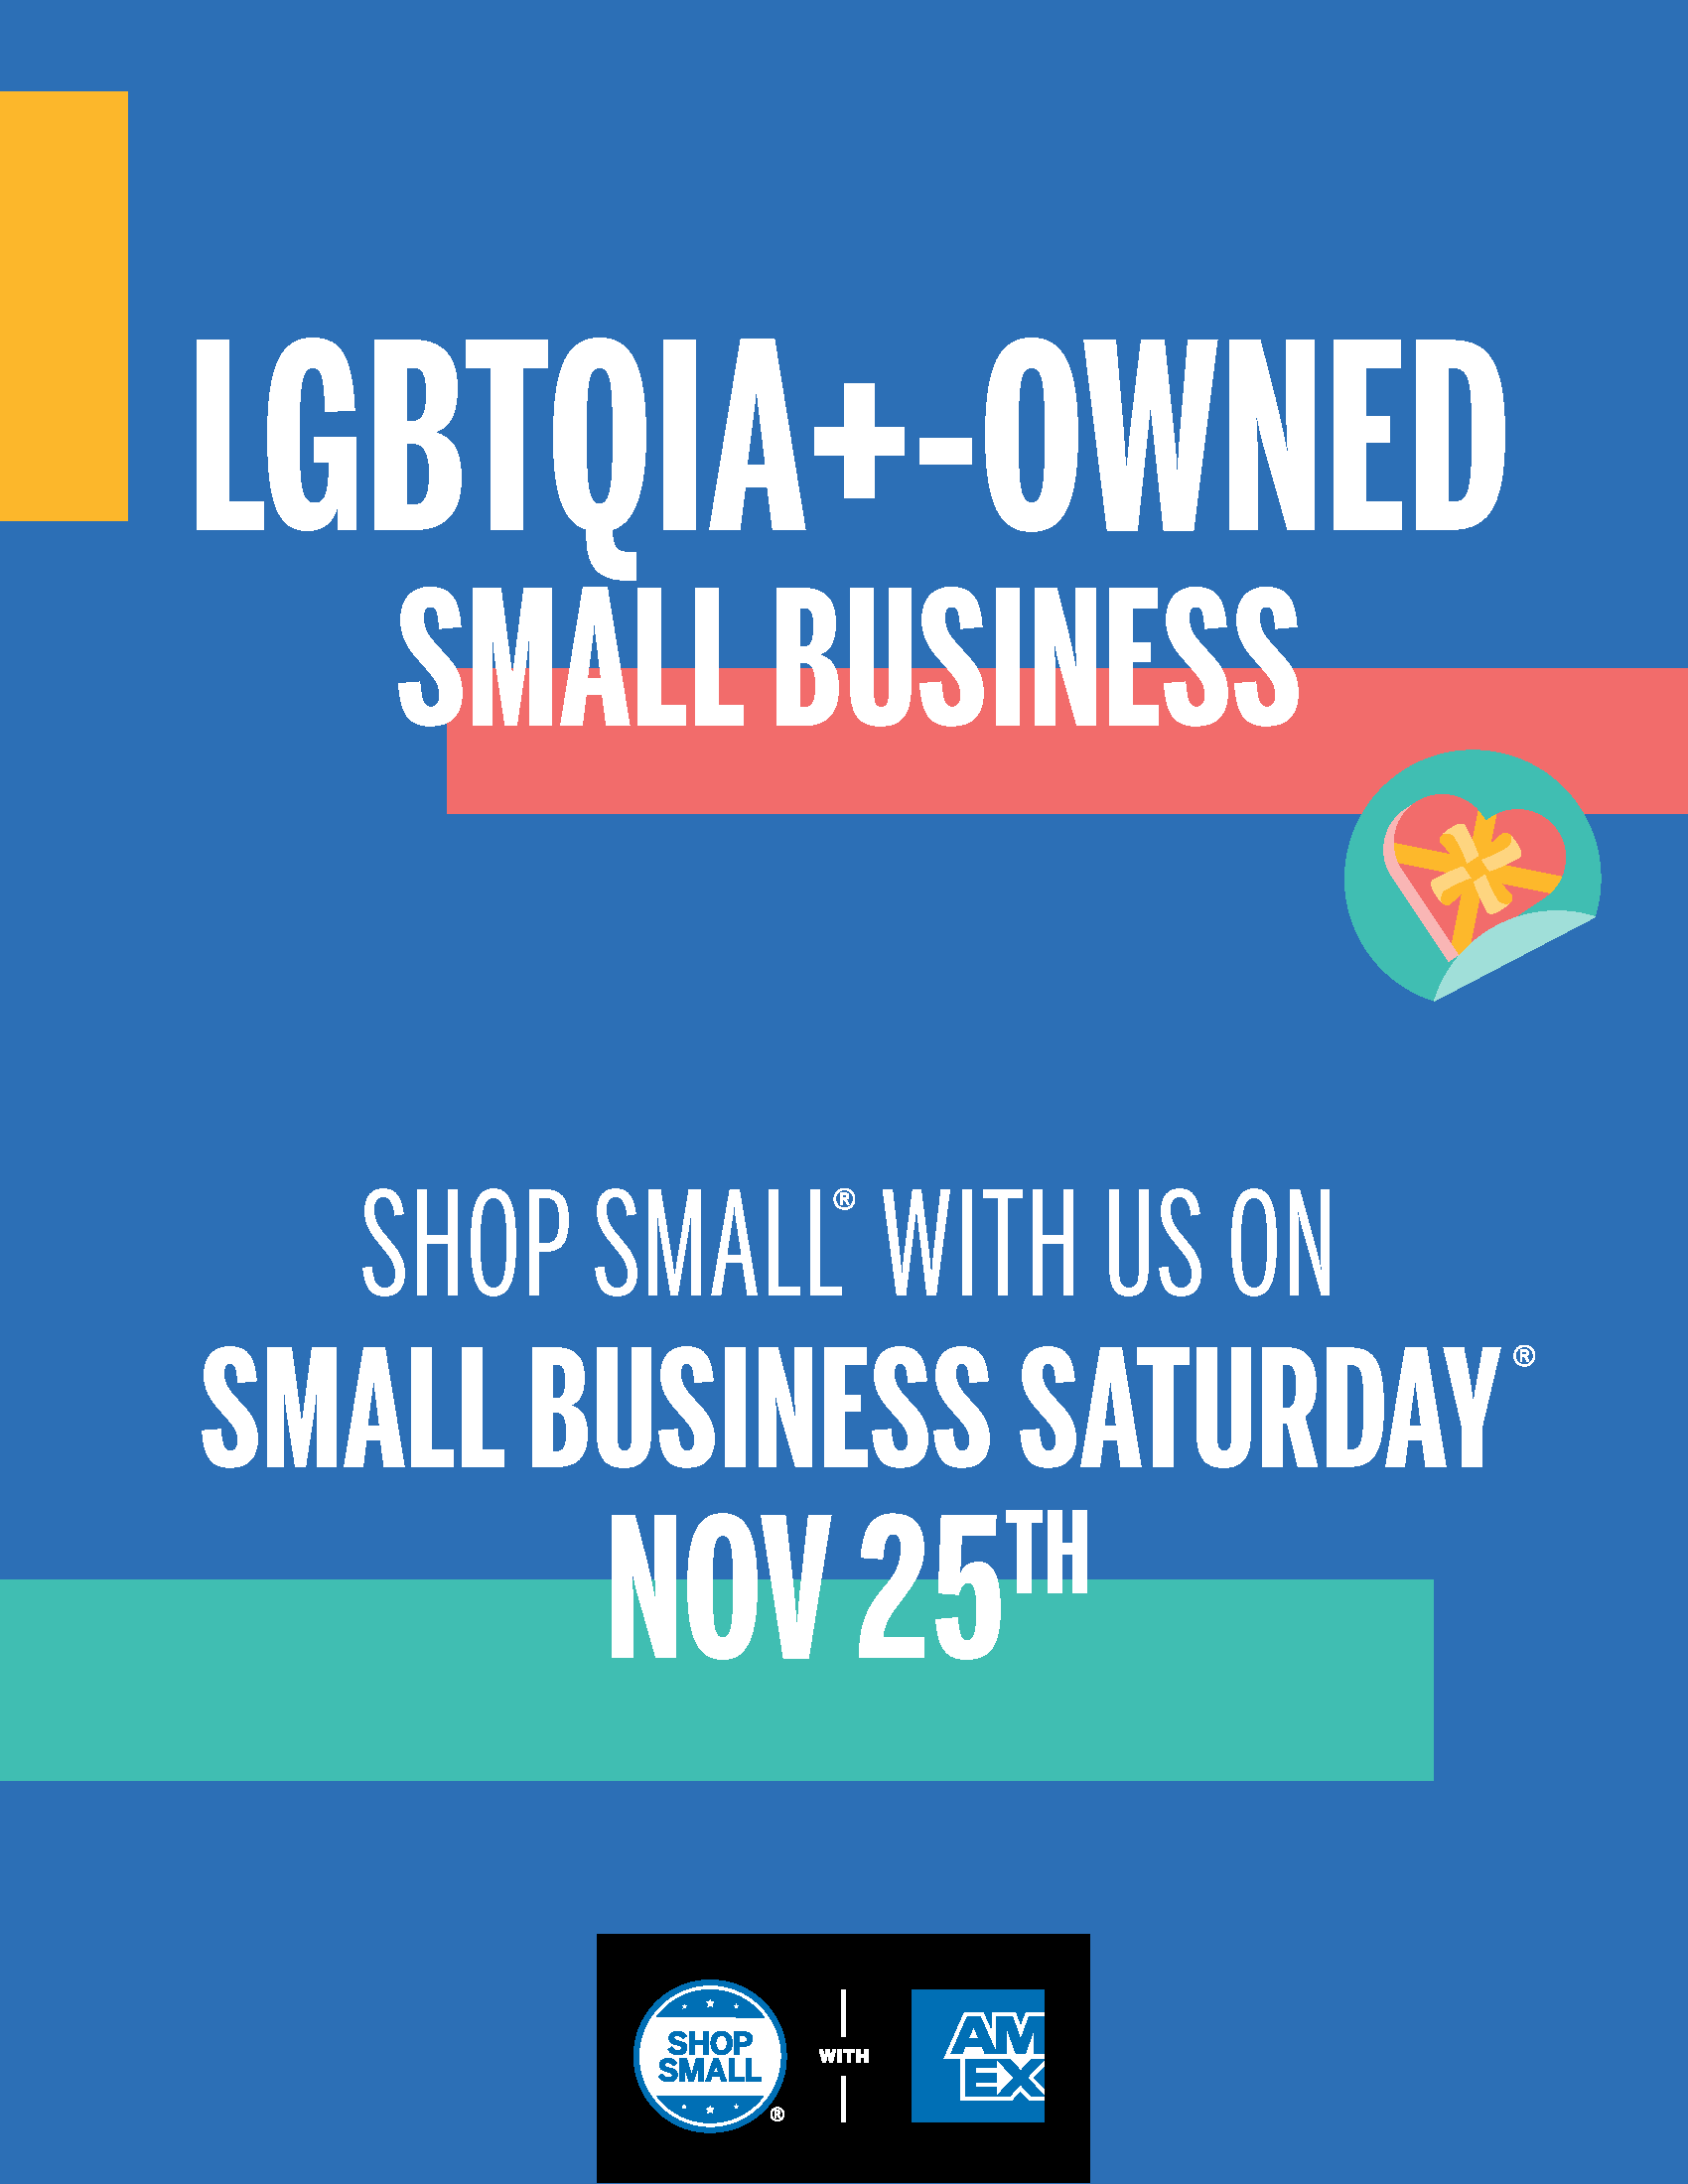 Thumbnail image of Poster PDF that reads LGBTQIA+ Owned Small Business; Shop Small with us on Small Business Saturday Nov 25th and includes the Shop Small with Amex logo